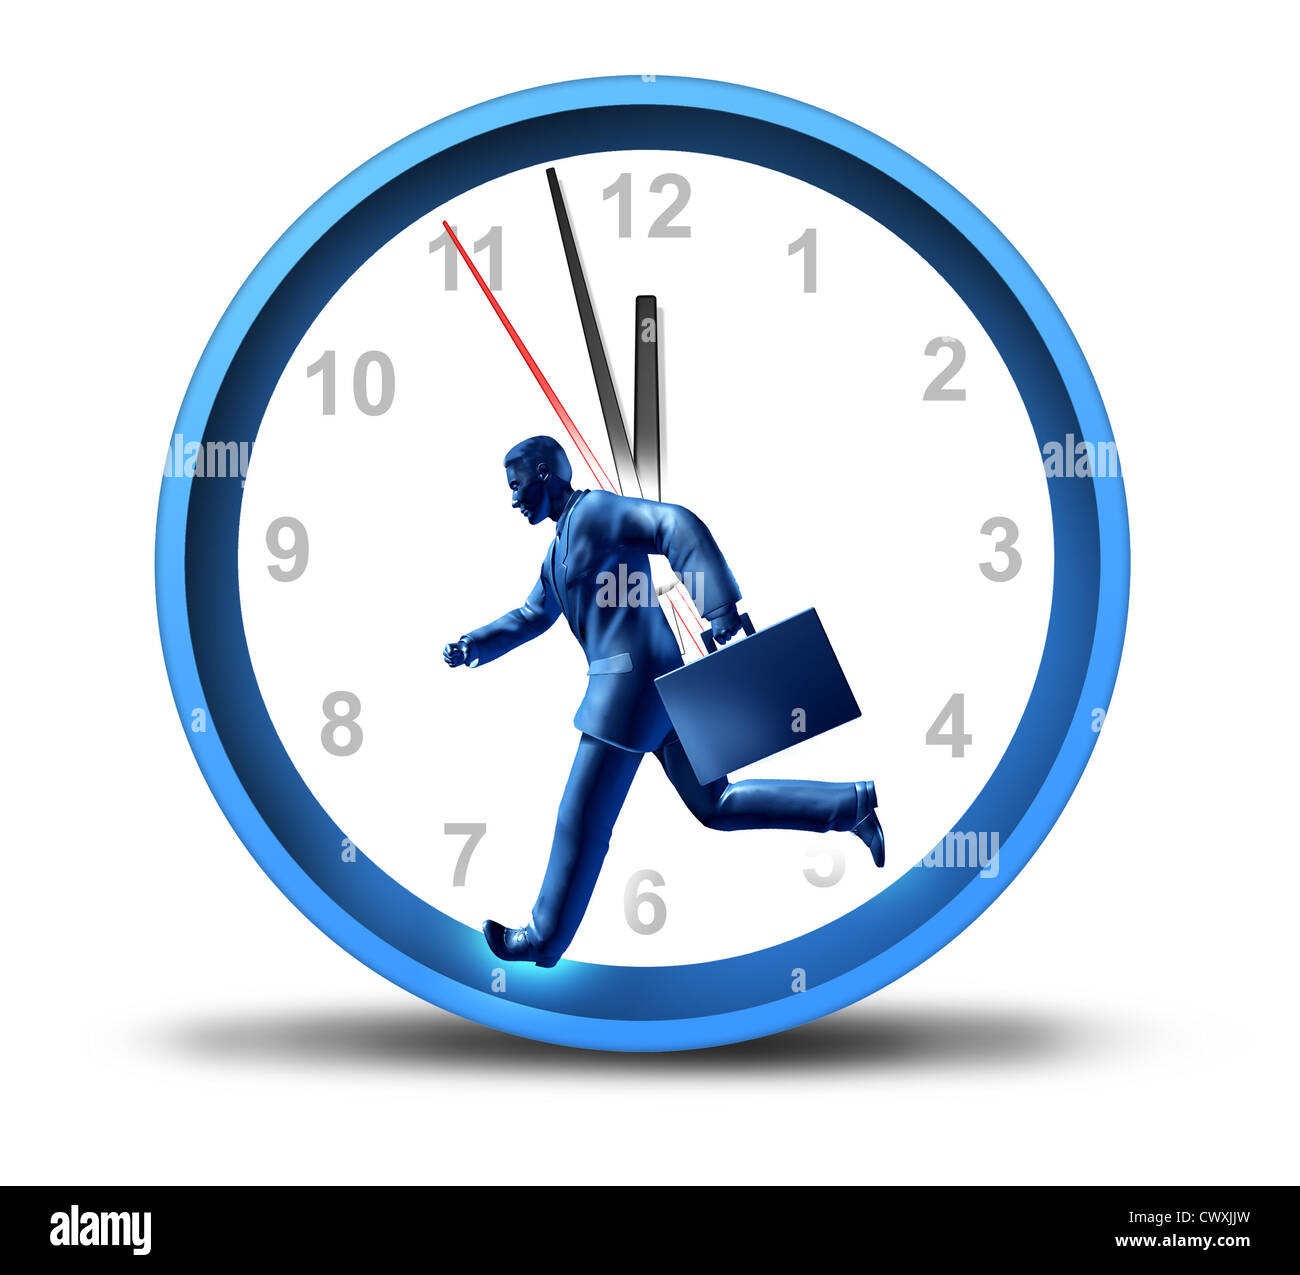 Urgent business deadline with a man in a suit and breifcase running in a clock with minute and hour hands ticjing away as a symbol of work pressure and financial stress based on time constraints or fast service. Stock Photo